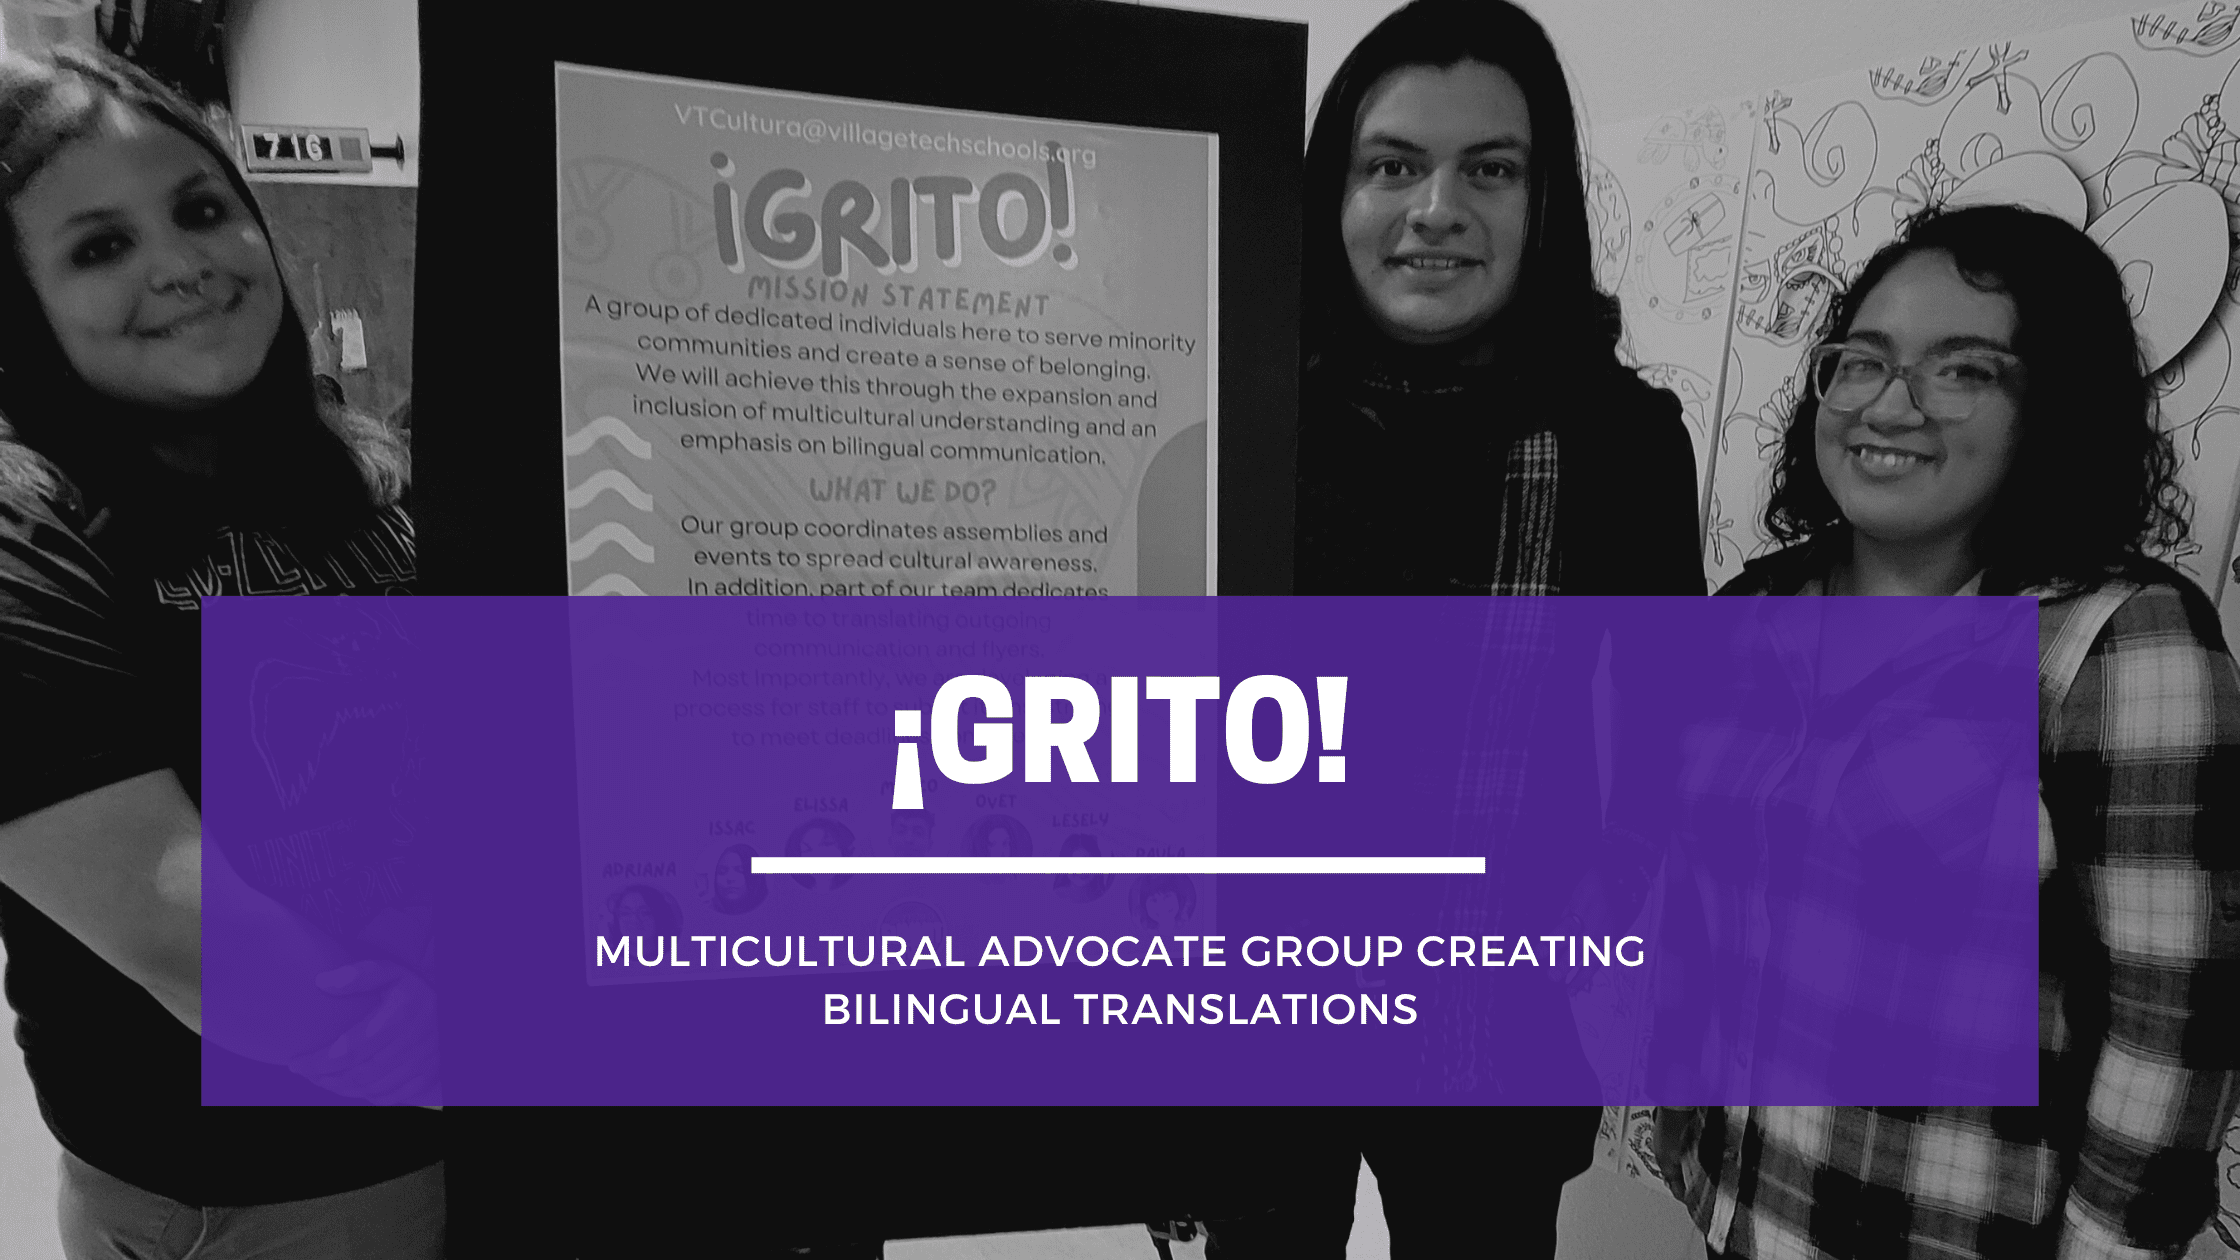 ¡Grito! Multicultural Advocate Group Creating Bilingual Translations